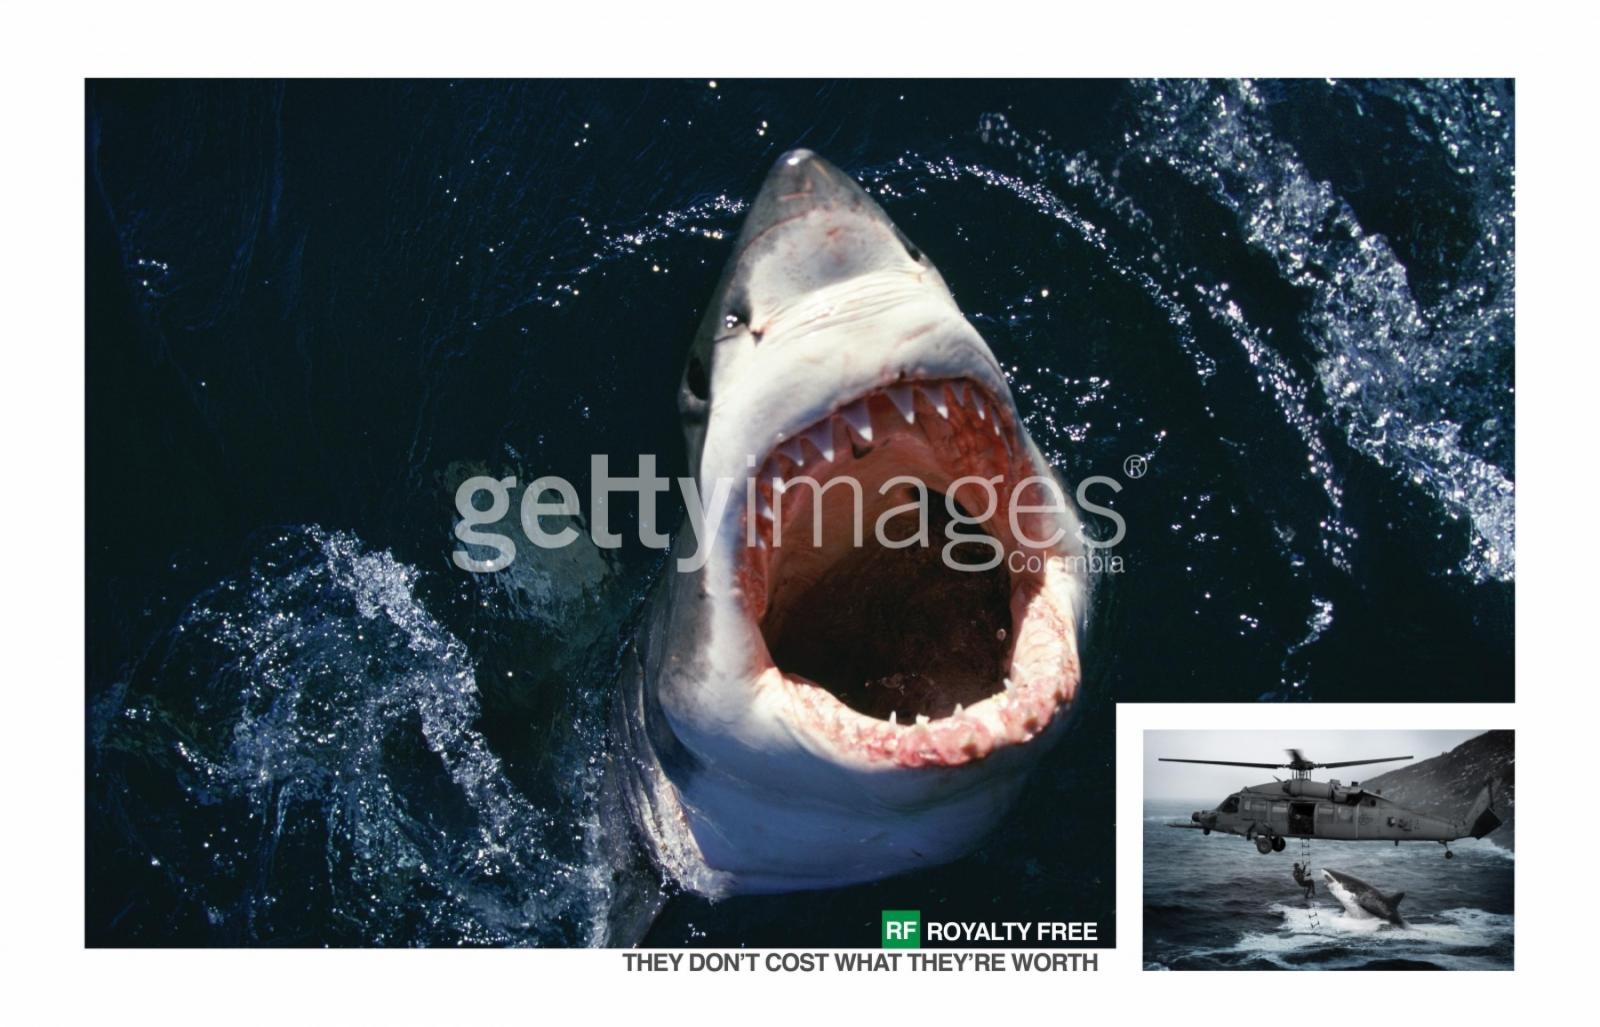 Getty Shark Images